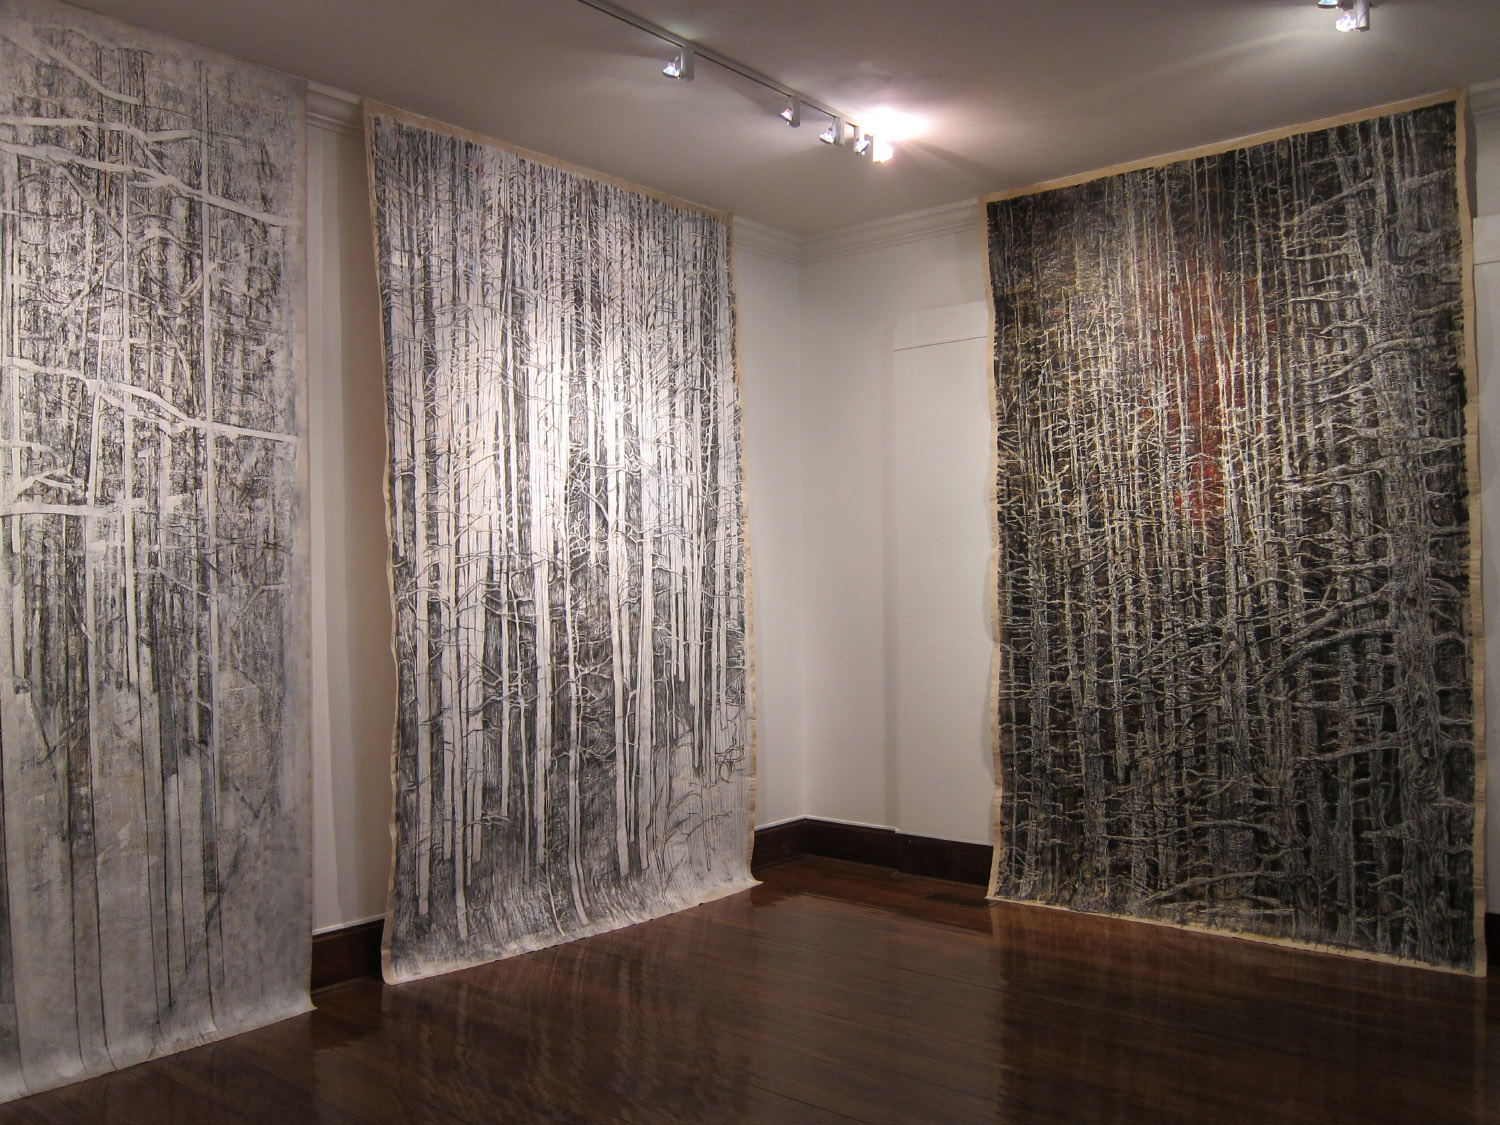 2ag(4)-Whiteout, Curtains, Snags, Curtains - each  133x83 in. mm on canvas- 2010, Beeville Art Museum.JPG